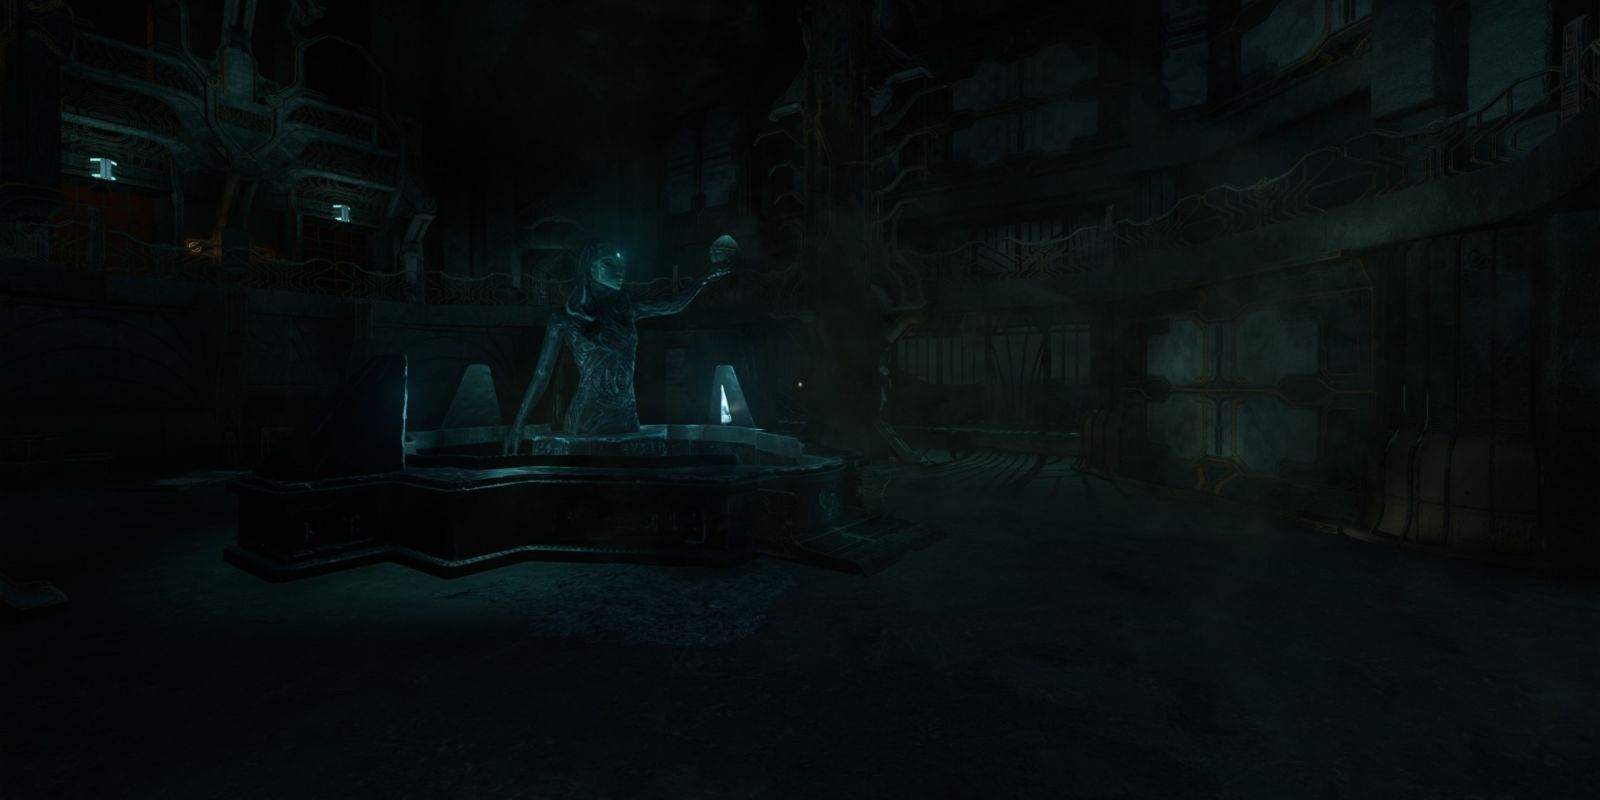 The fountain that corrupted the Cassandra's crew